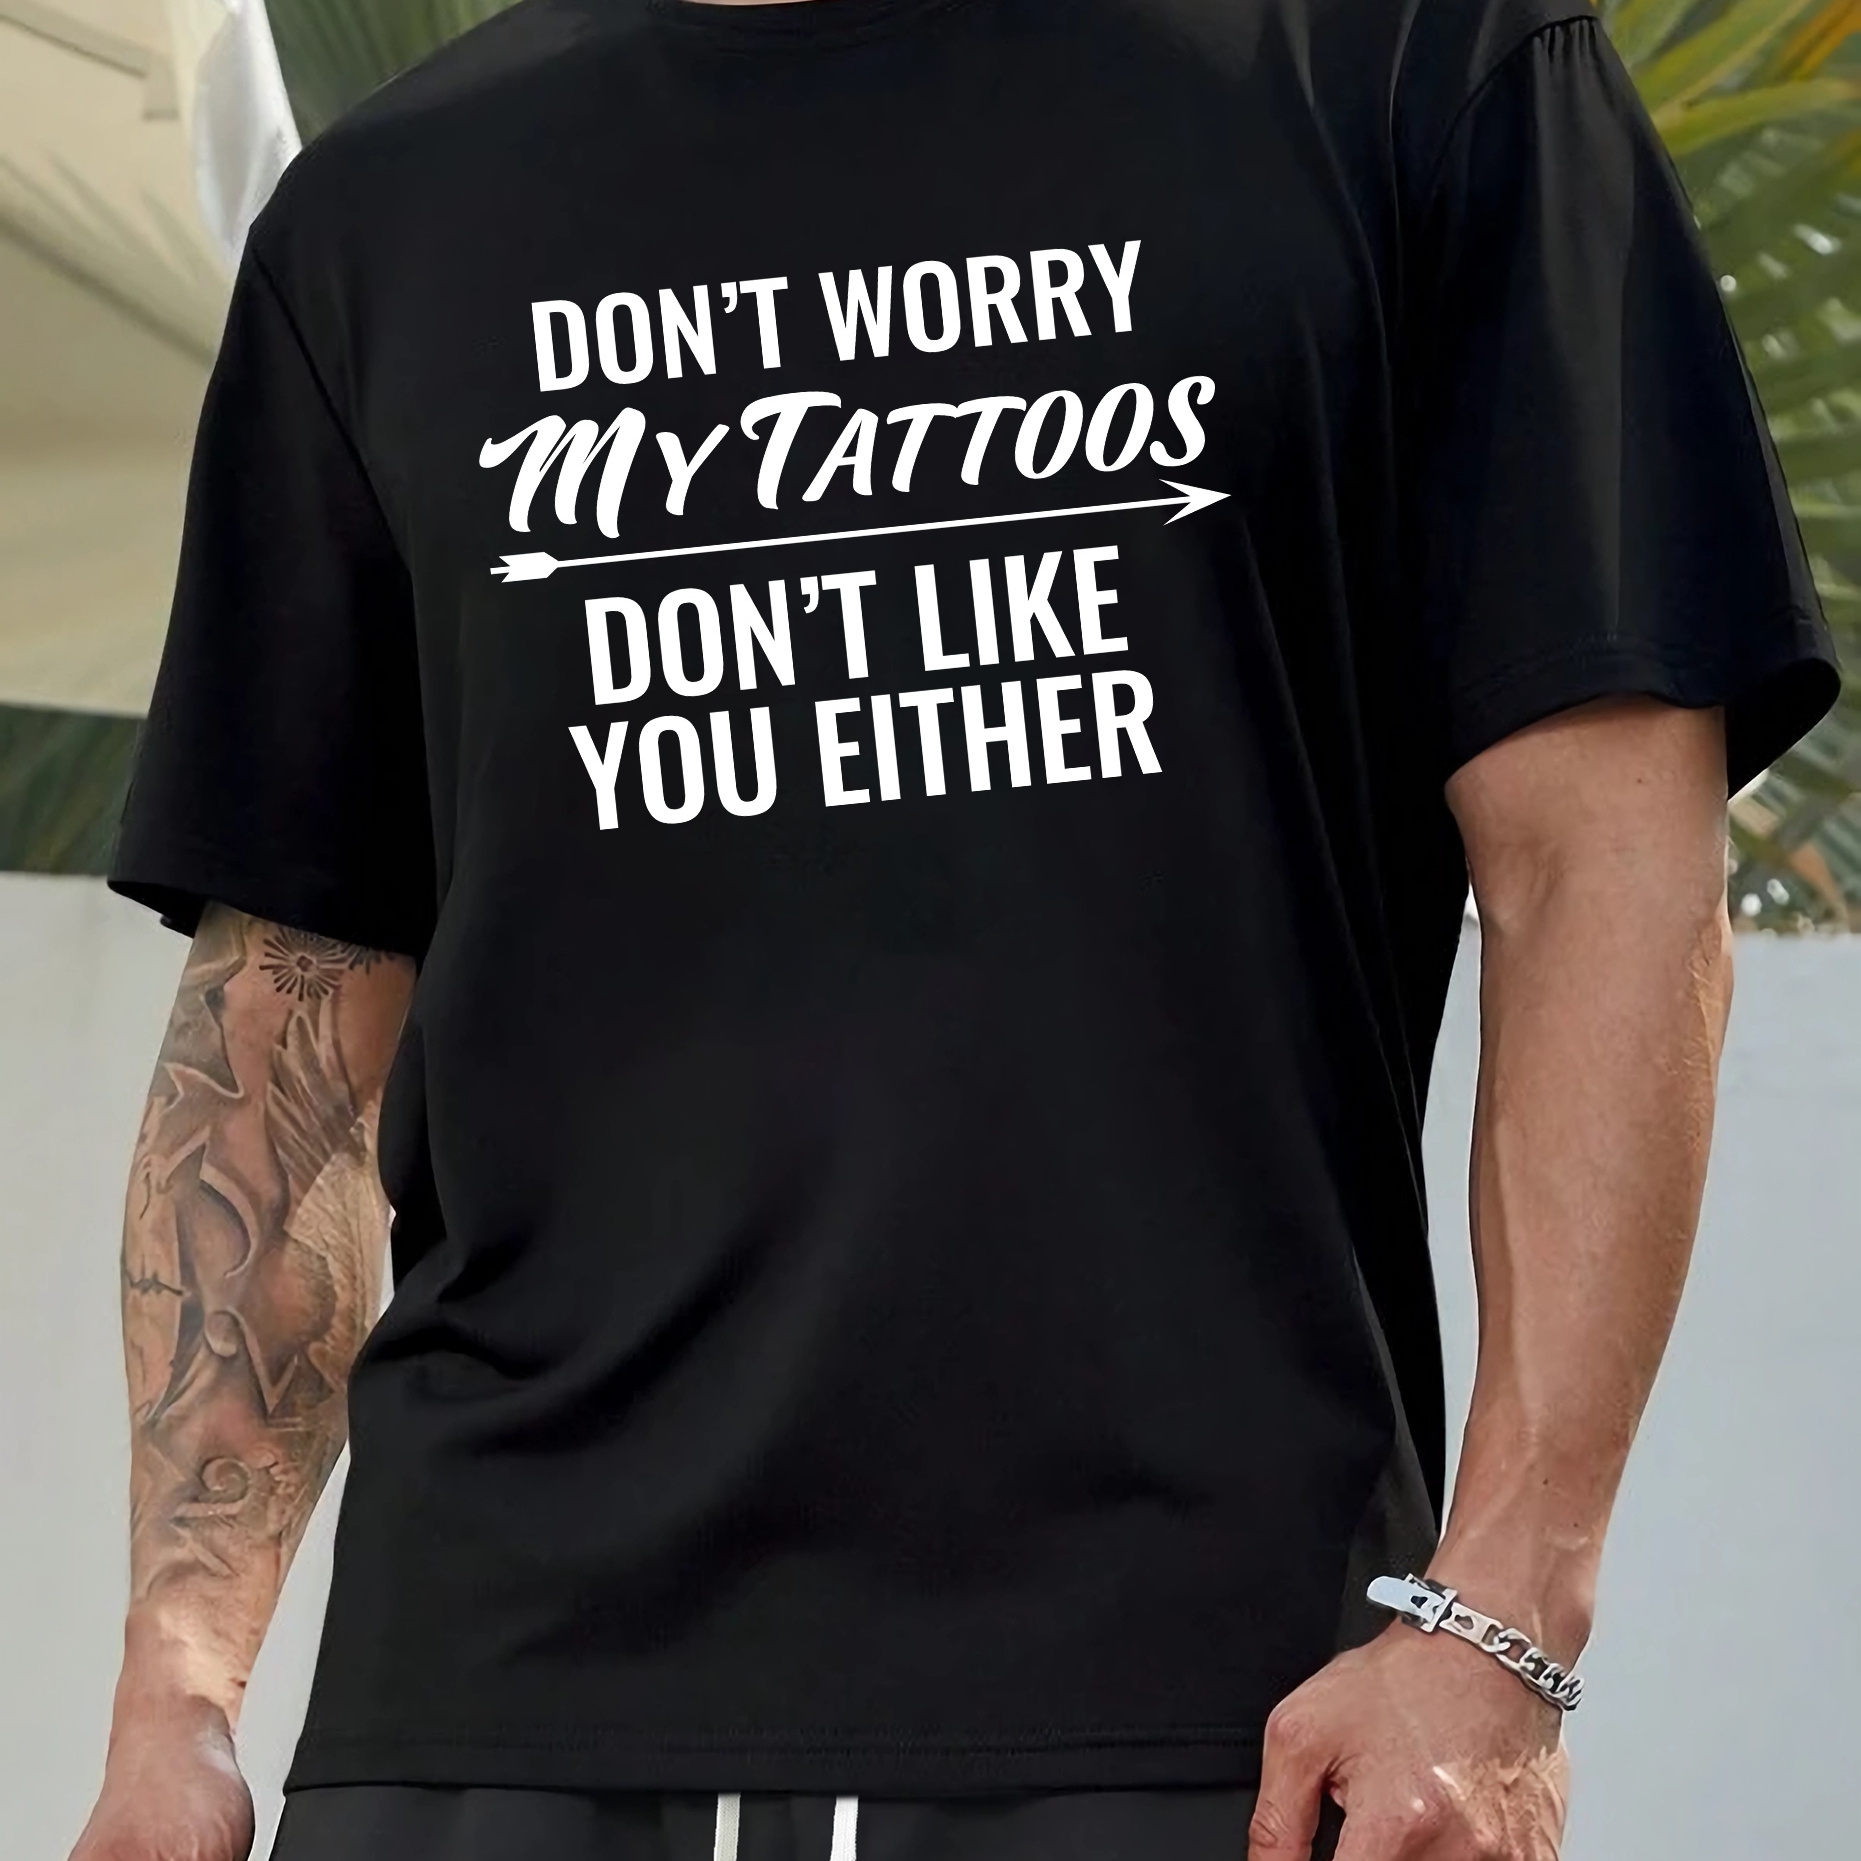 

Don't Worry Imy Tattoos Don't Like You Either Print Men's Round Neck Short Sleeve Tee Fashion Regular Fit T-shirt Top For Spring Summer Holiday